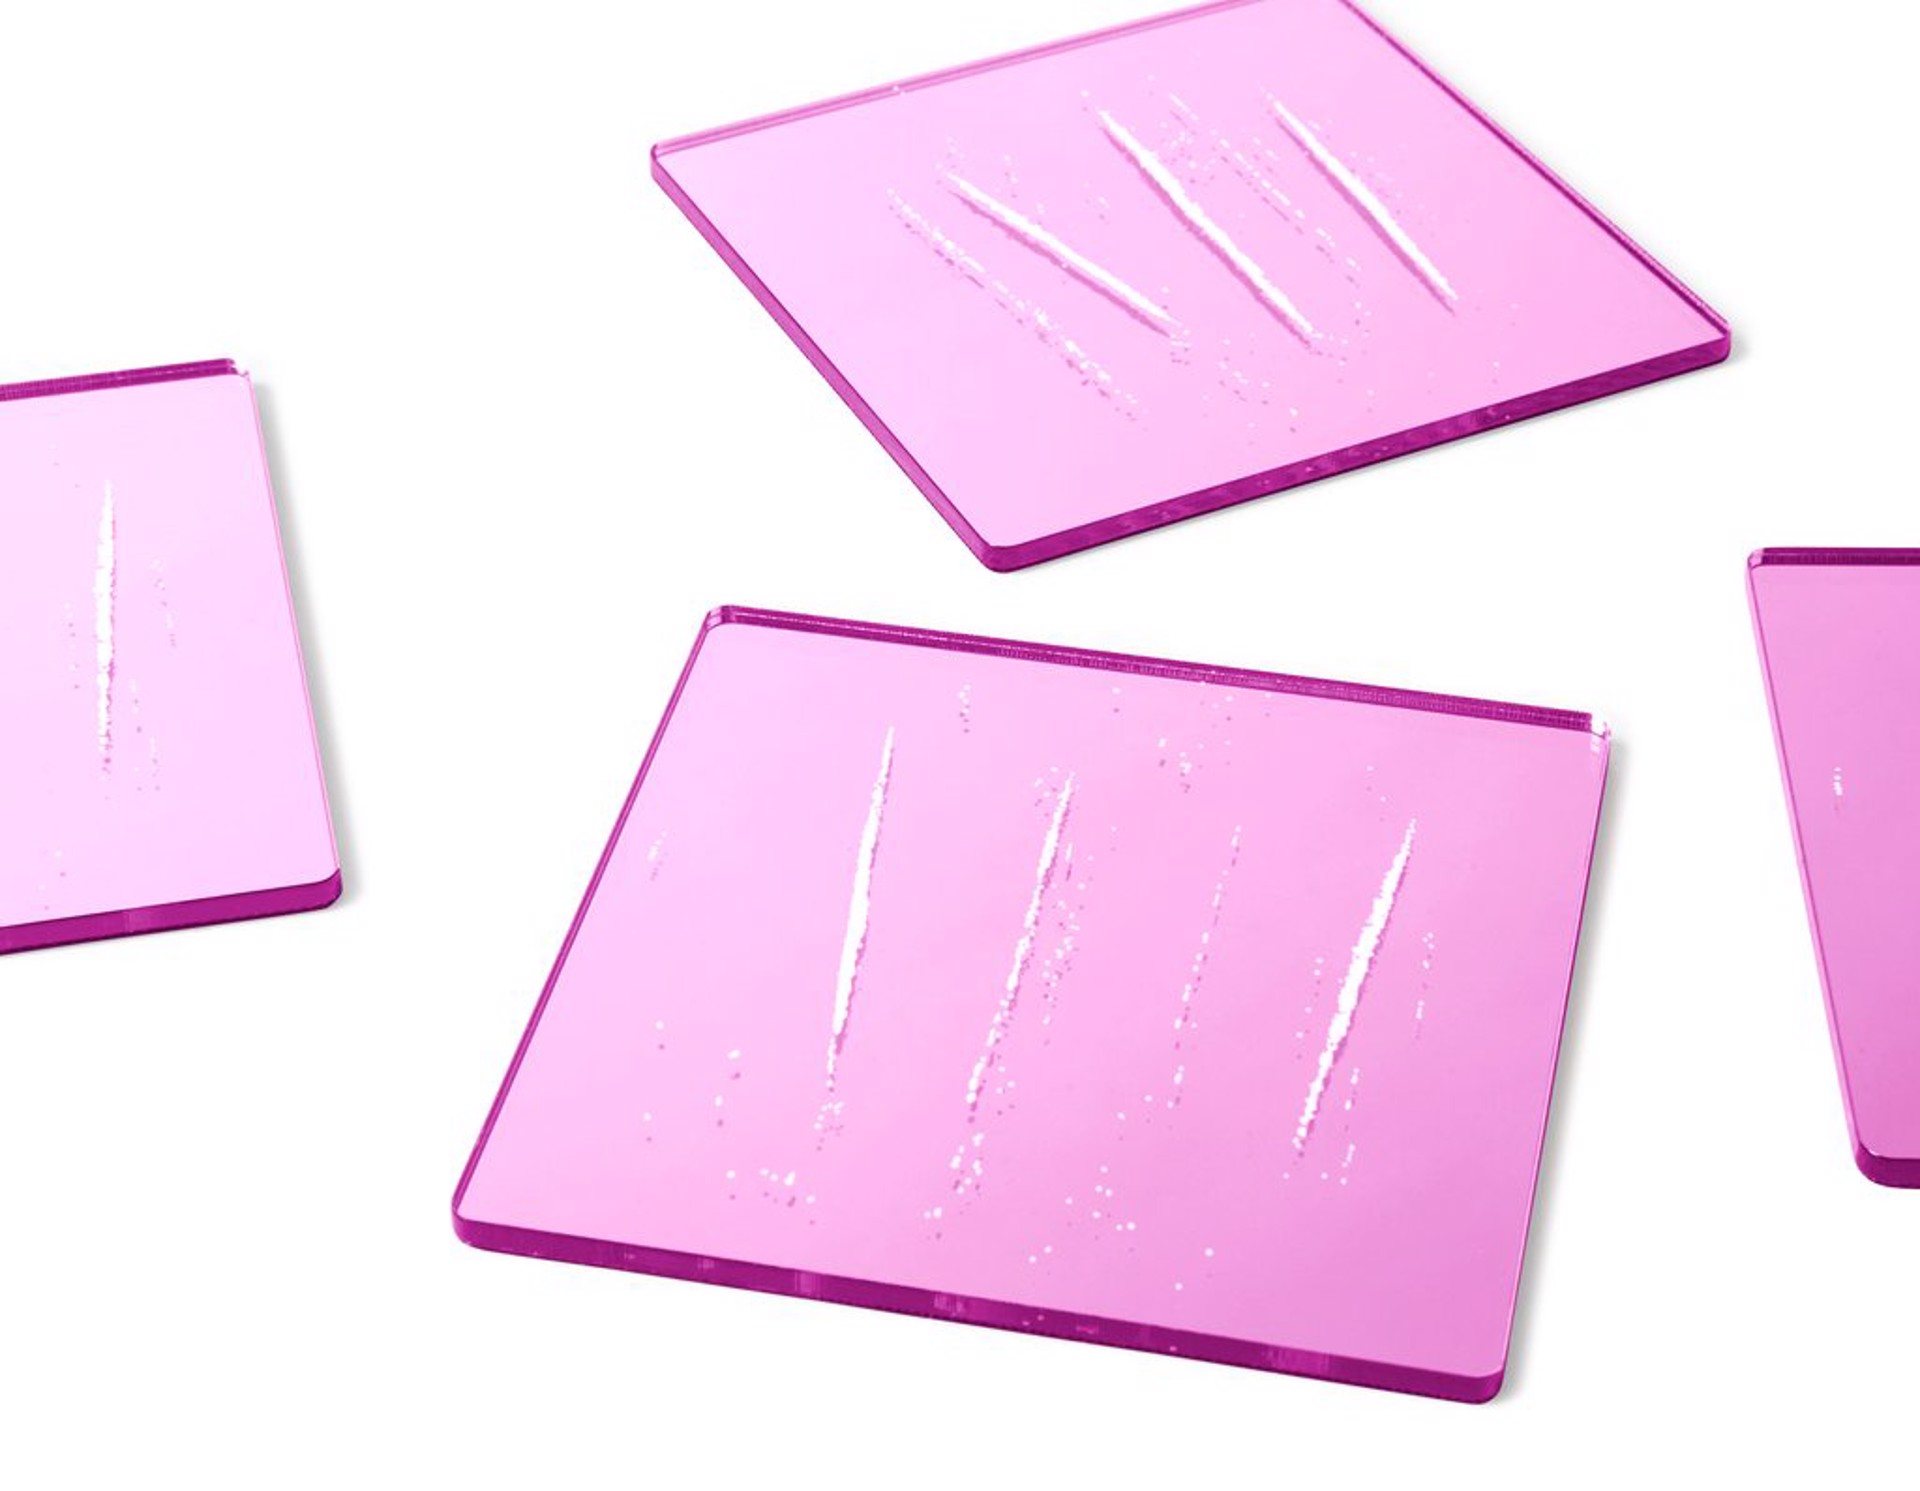 The Night You Left Coasters (Pink) by Nir Hod